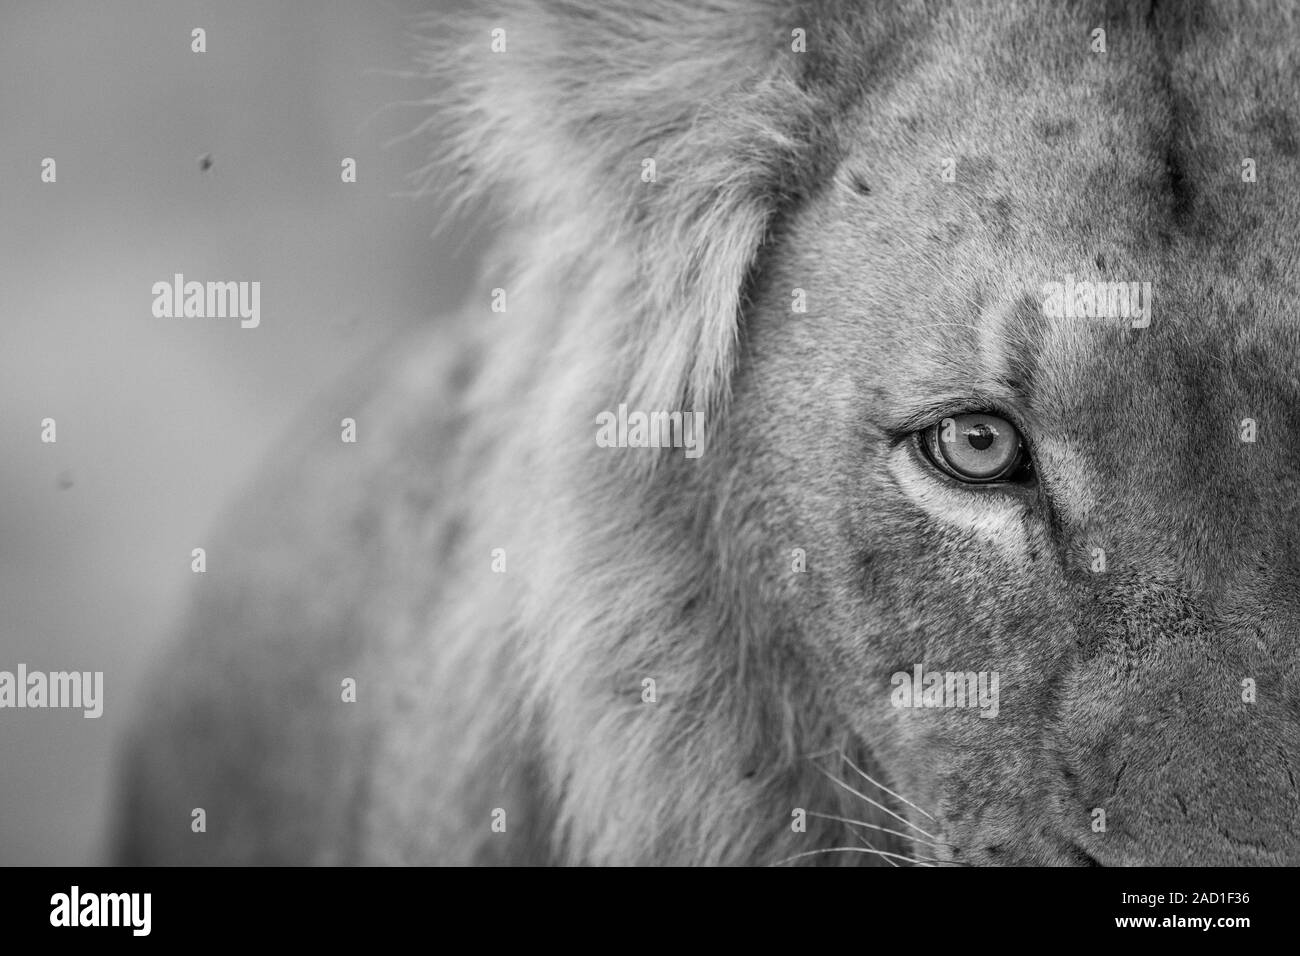 Lion eye in black and white in the Kruger National Park. Stock Photo